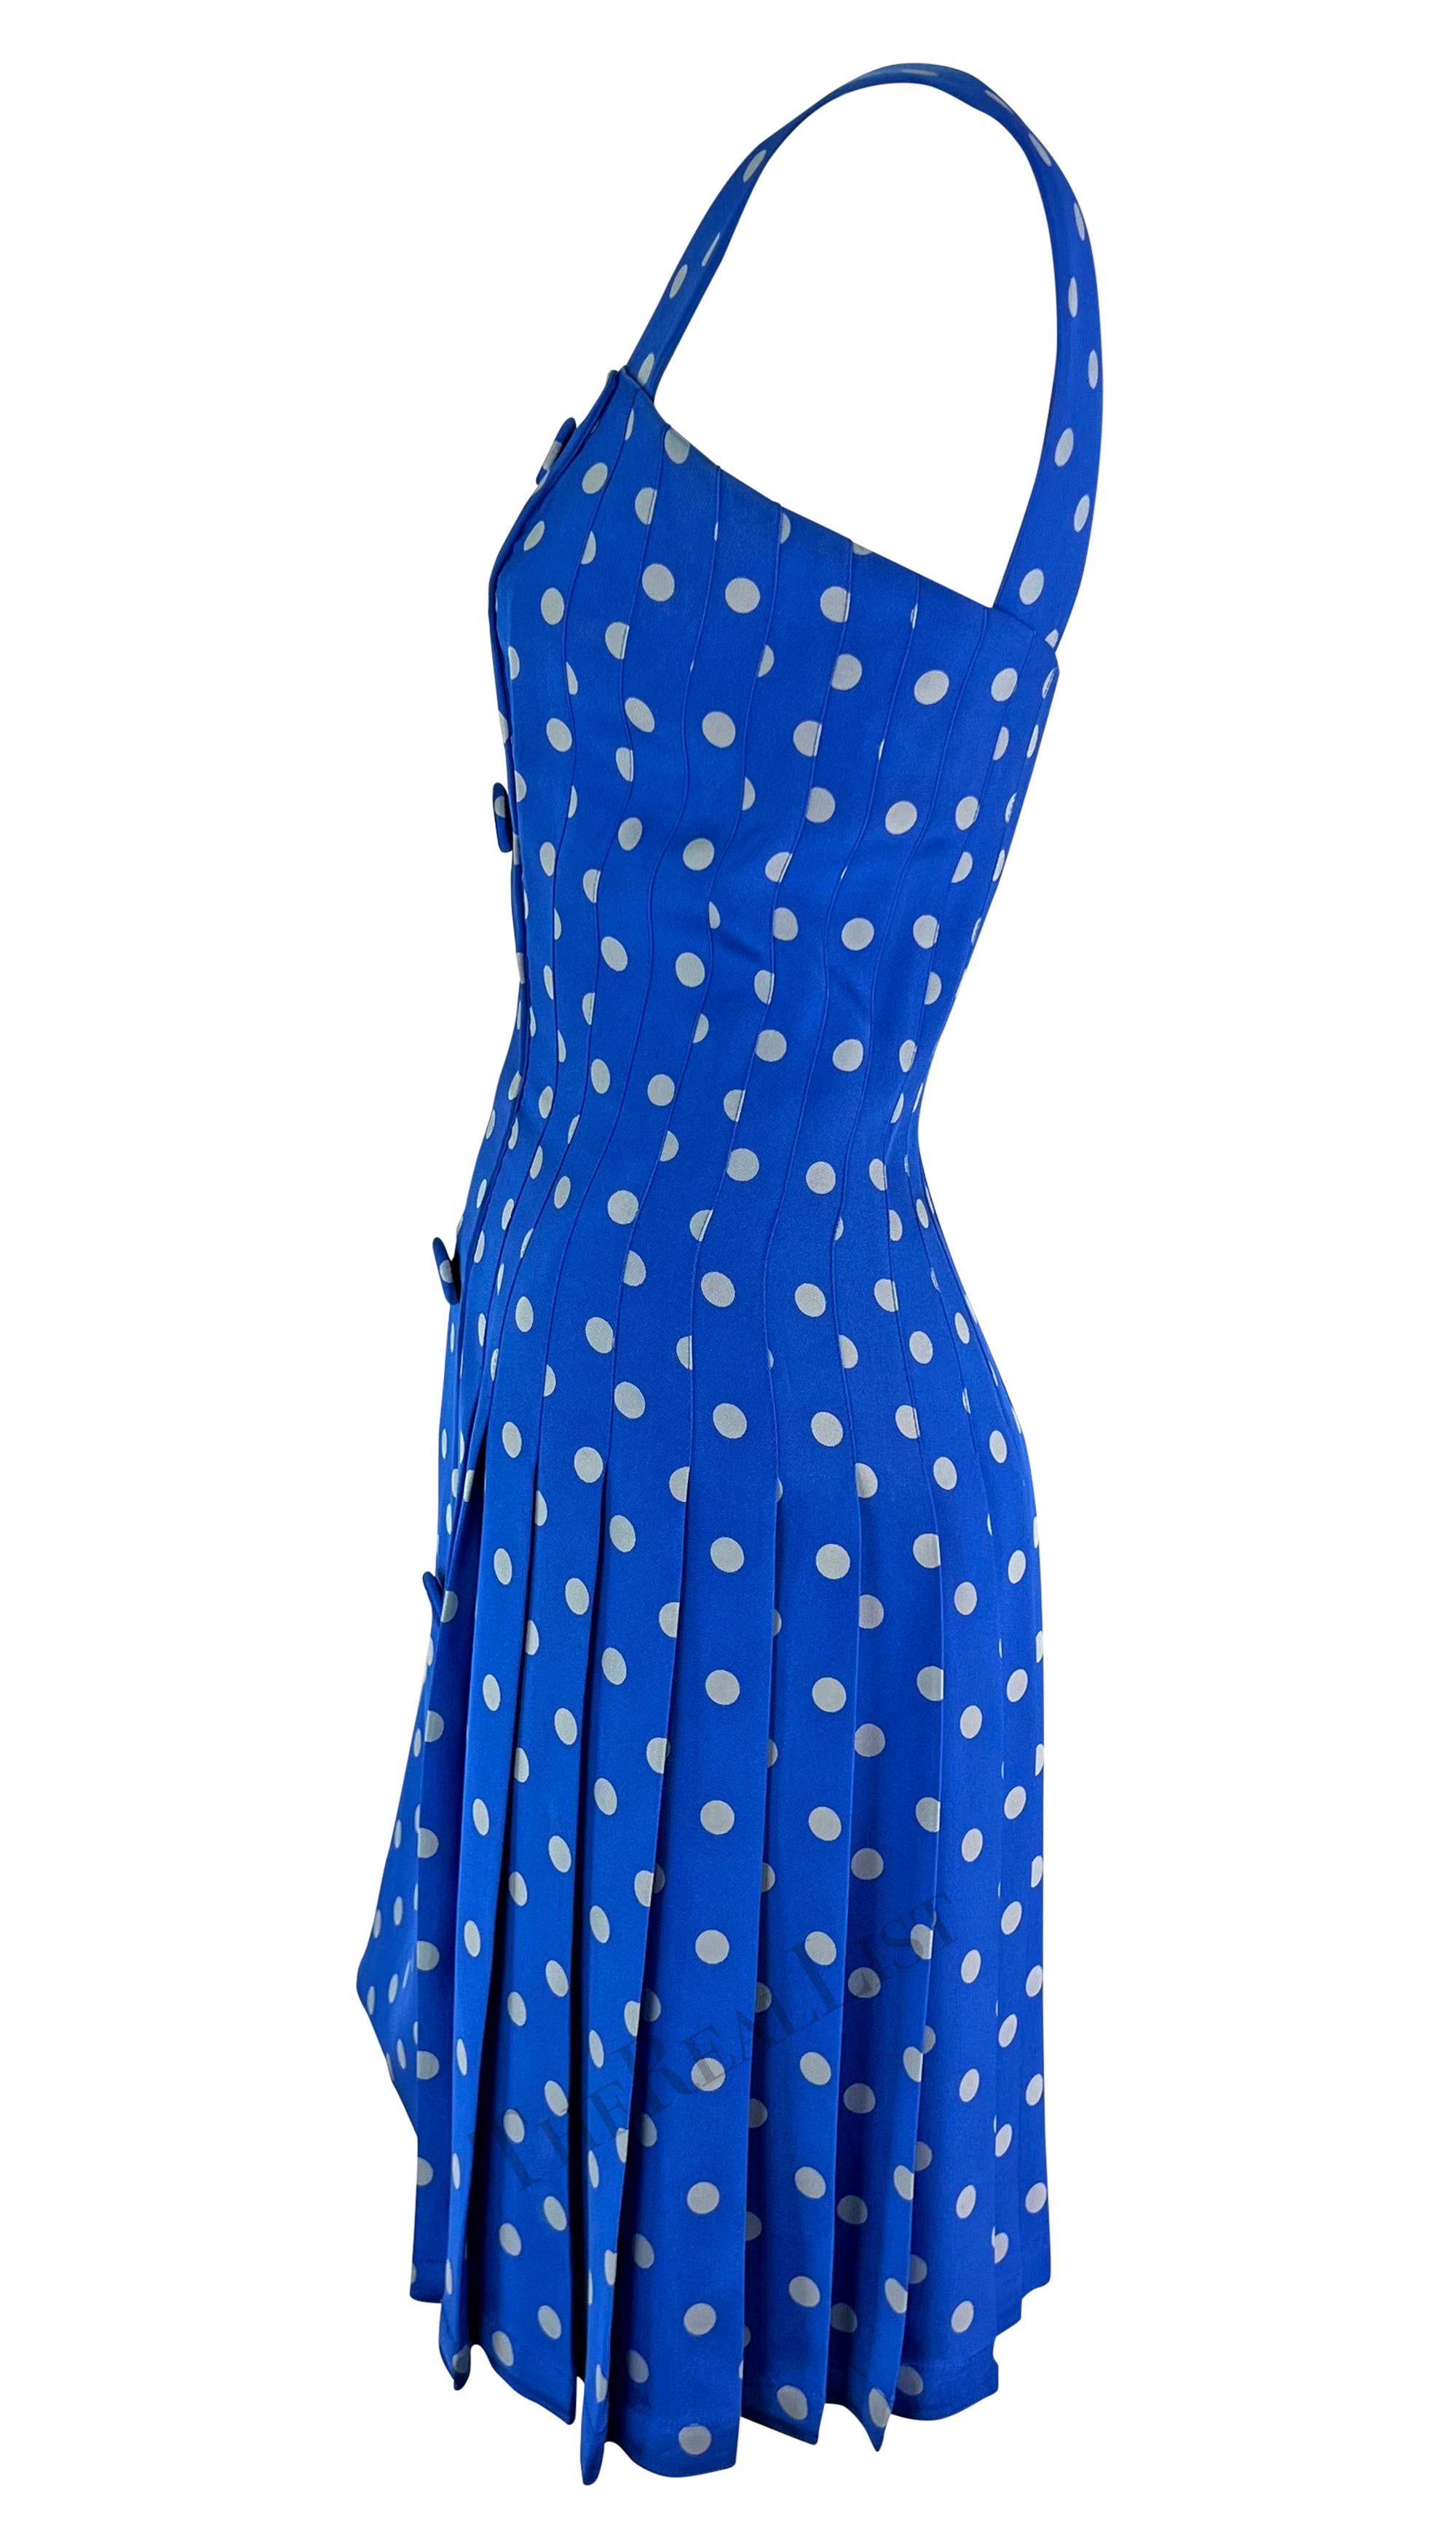 Women's S/S 1994 Gianni Versace Runway Blue Polka Dot Pleated Double Breasted Dress For Sale